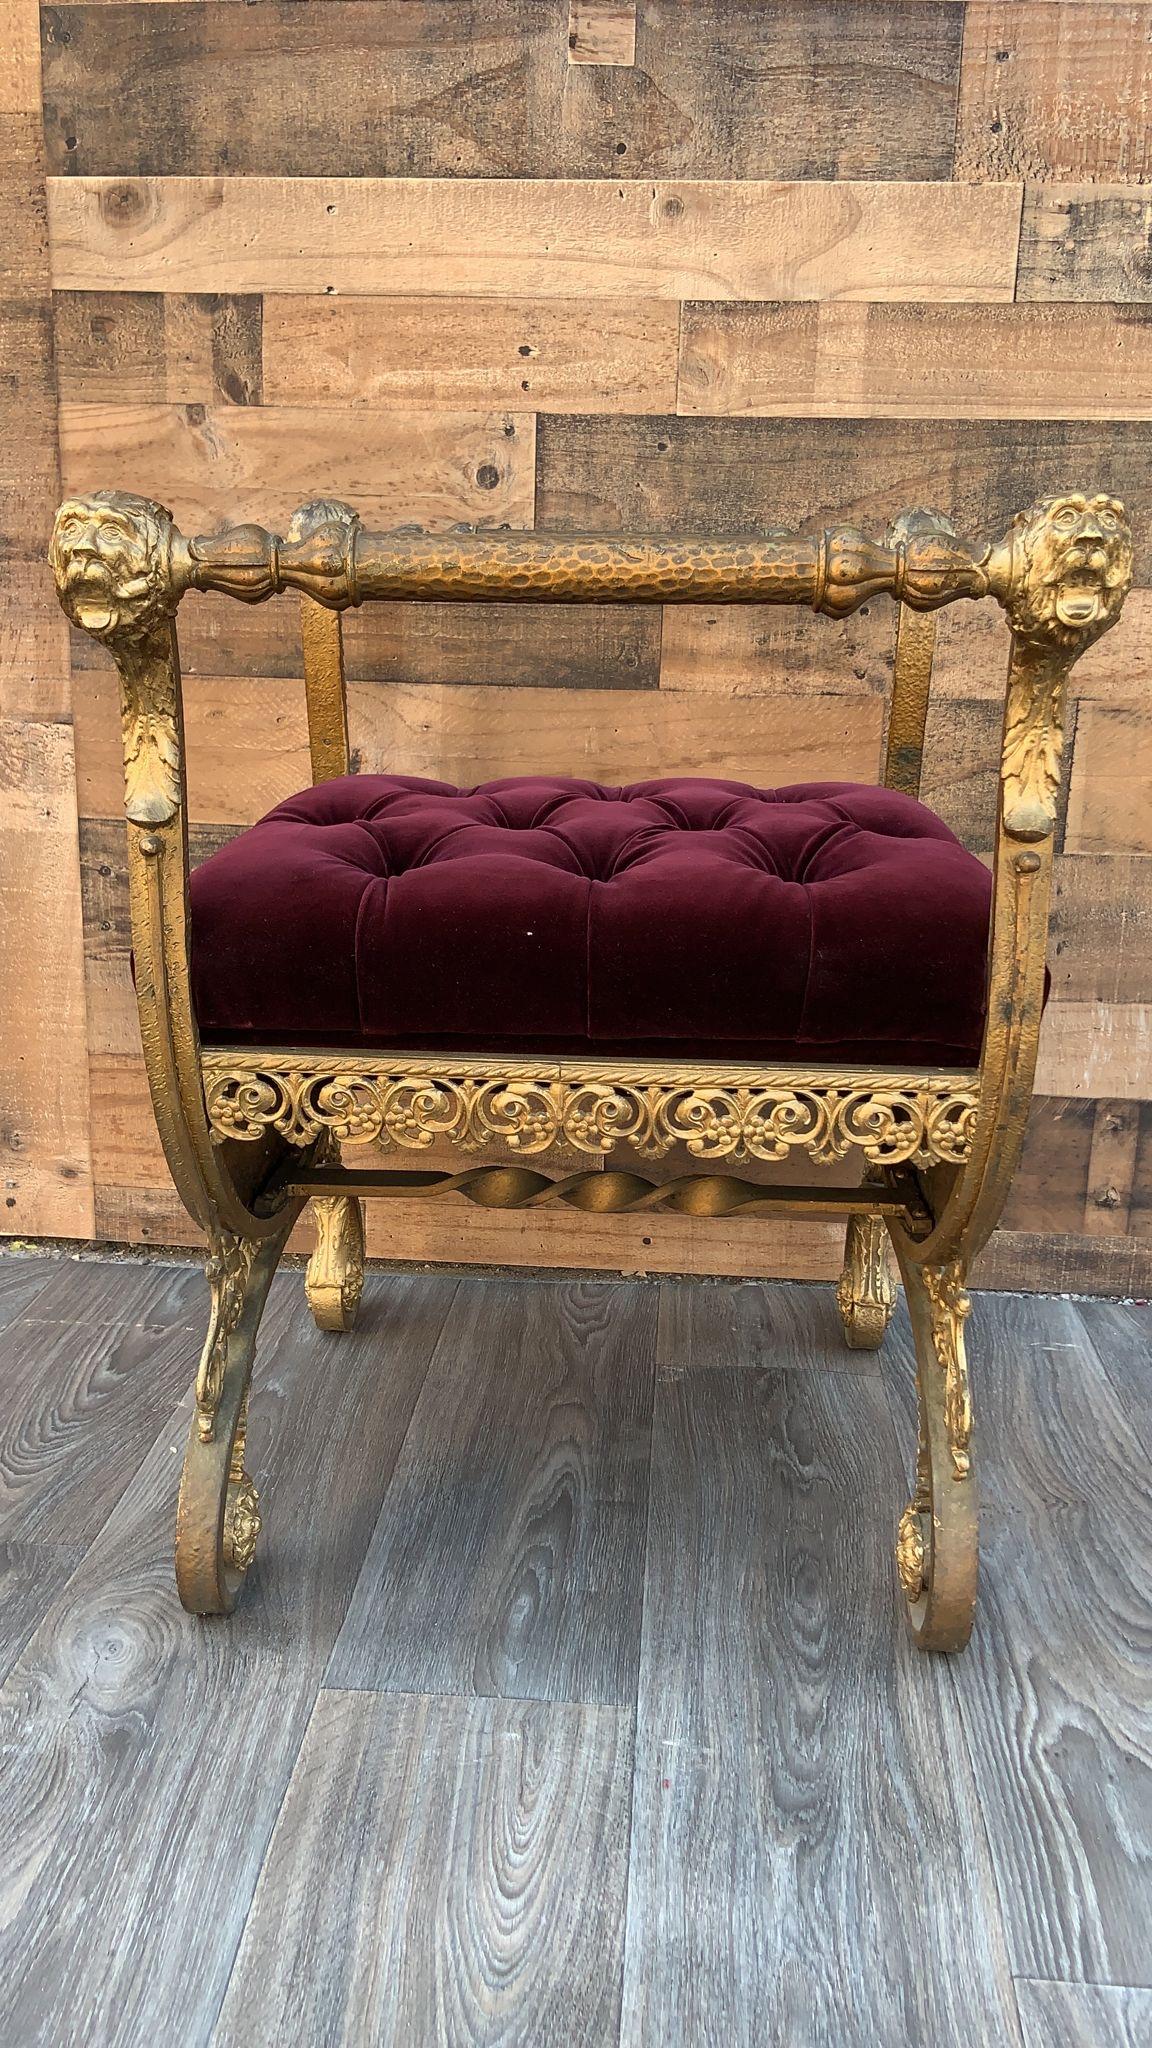 Late 19th Century Antique Italian Renaissance Ornate Scrolled Iron Vanity Bench Newly Upholstered  For Sale